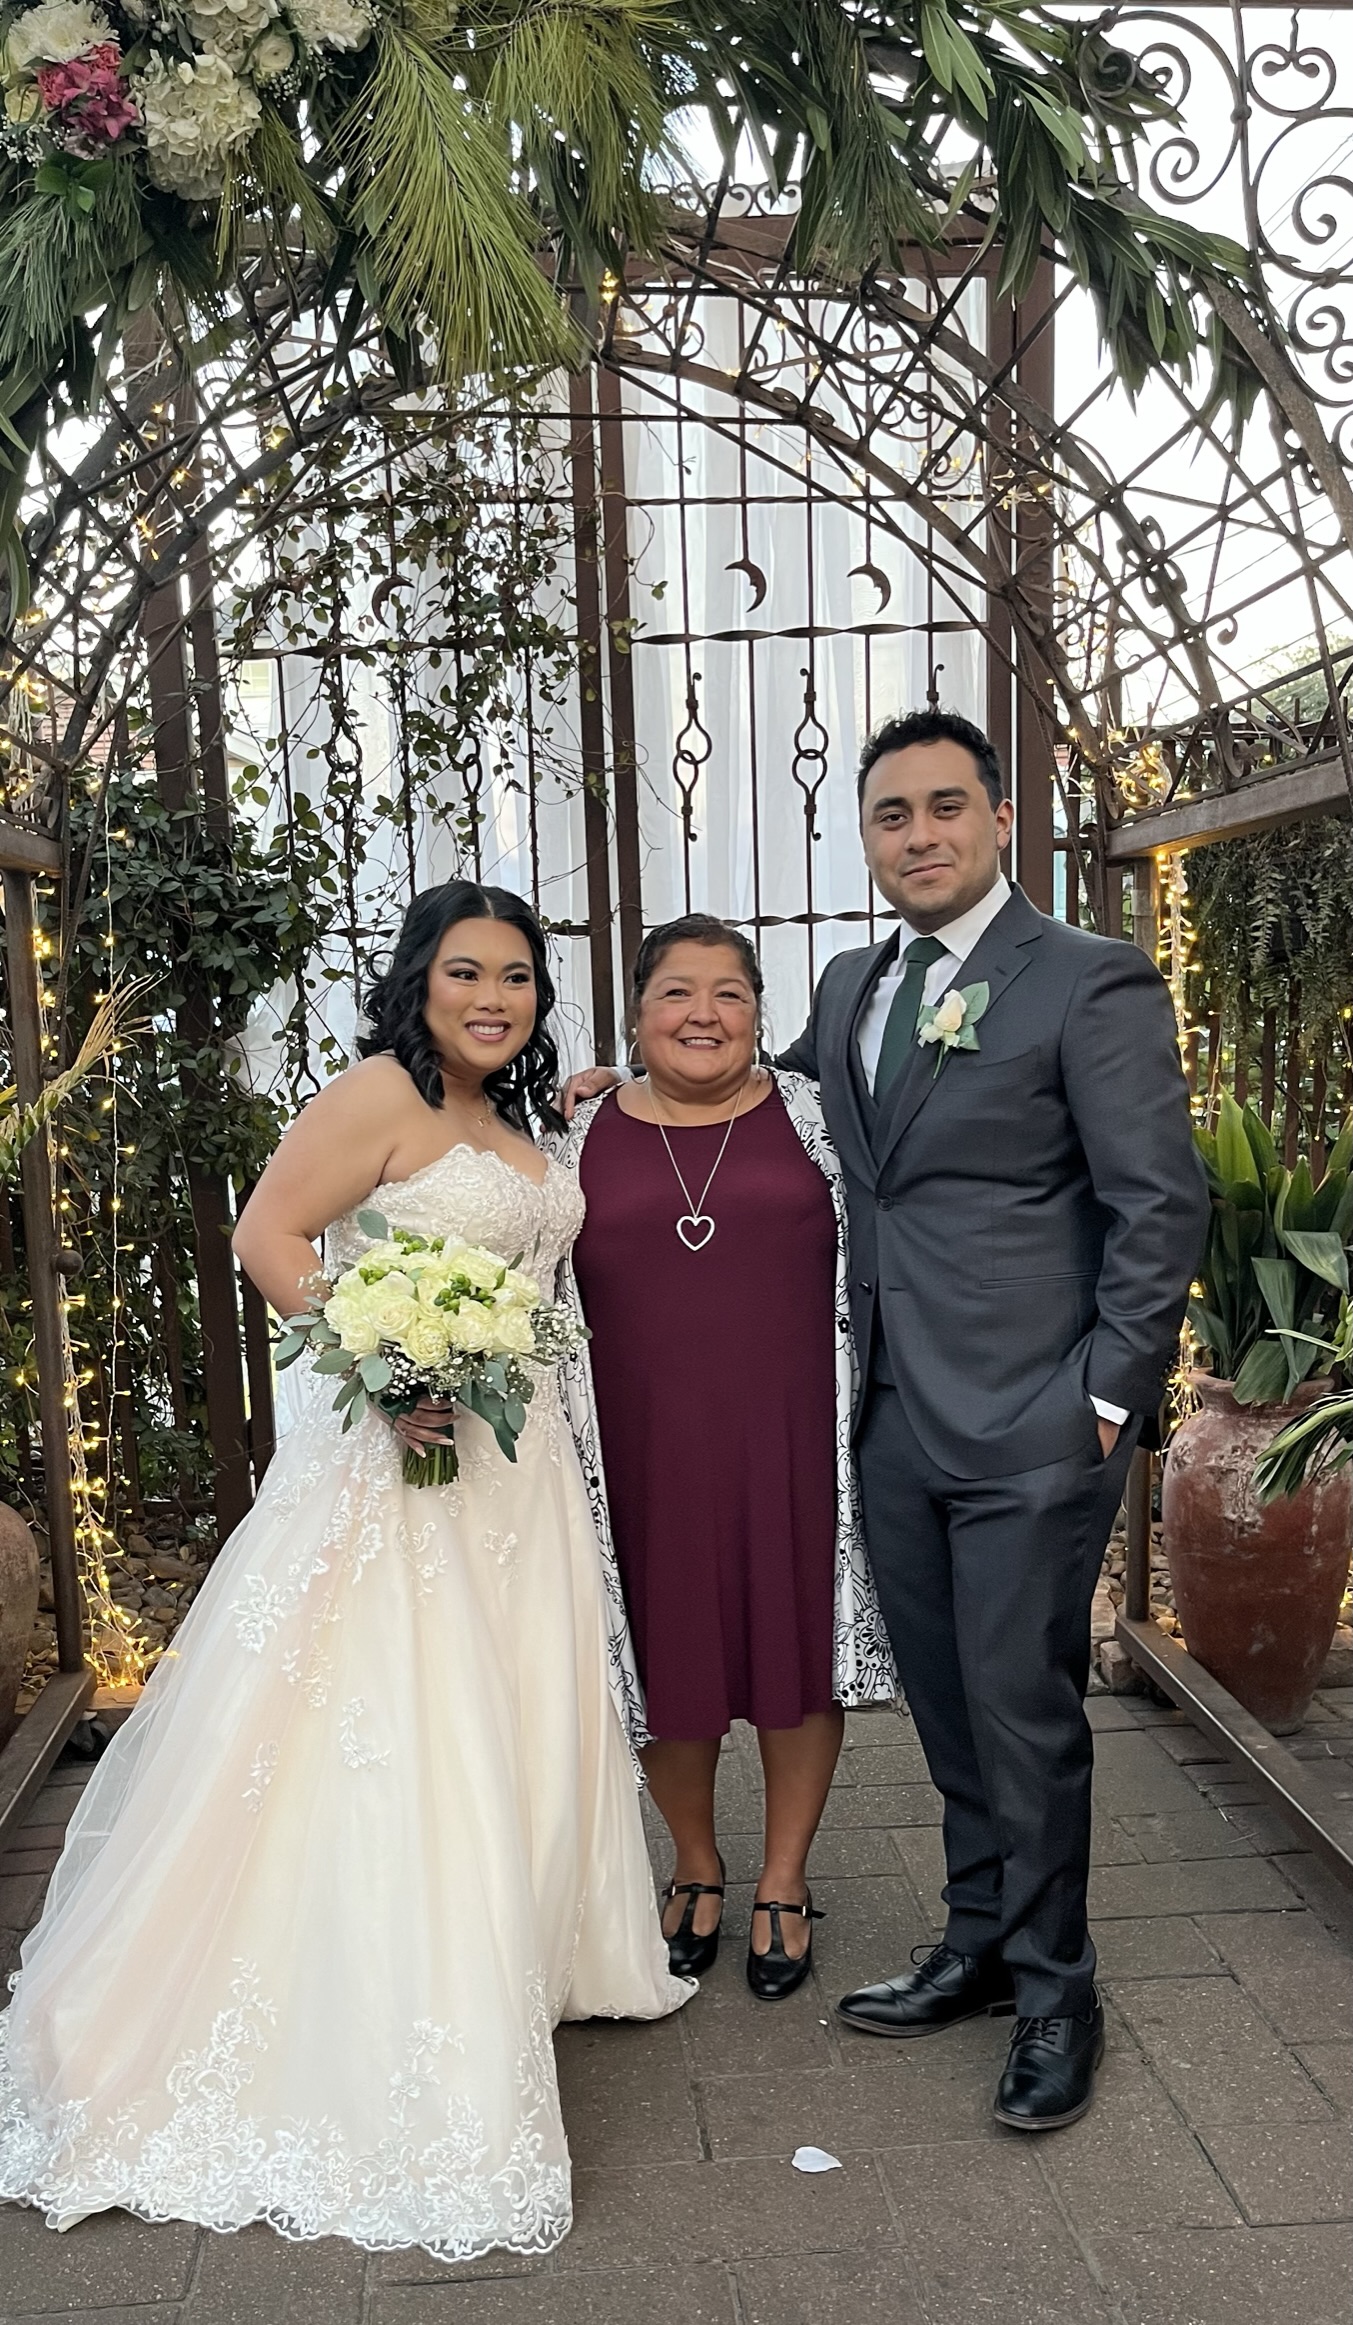 Yvette and bride and groom